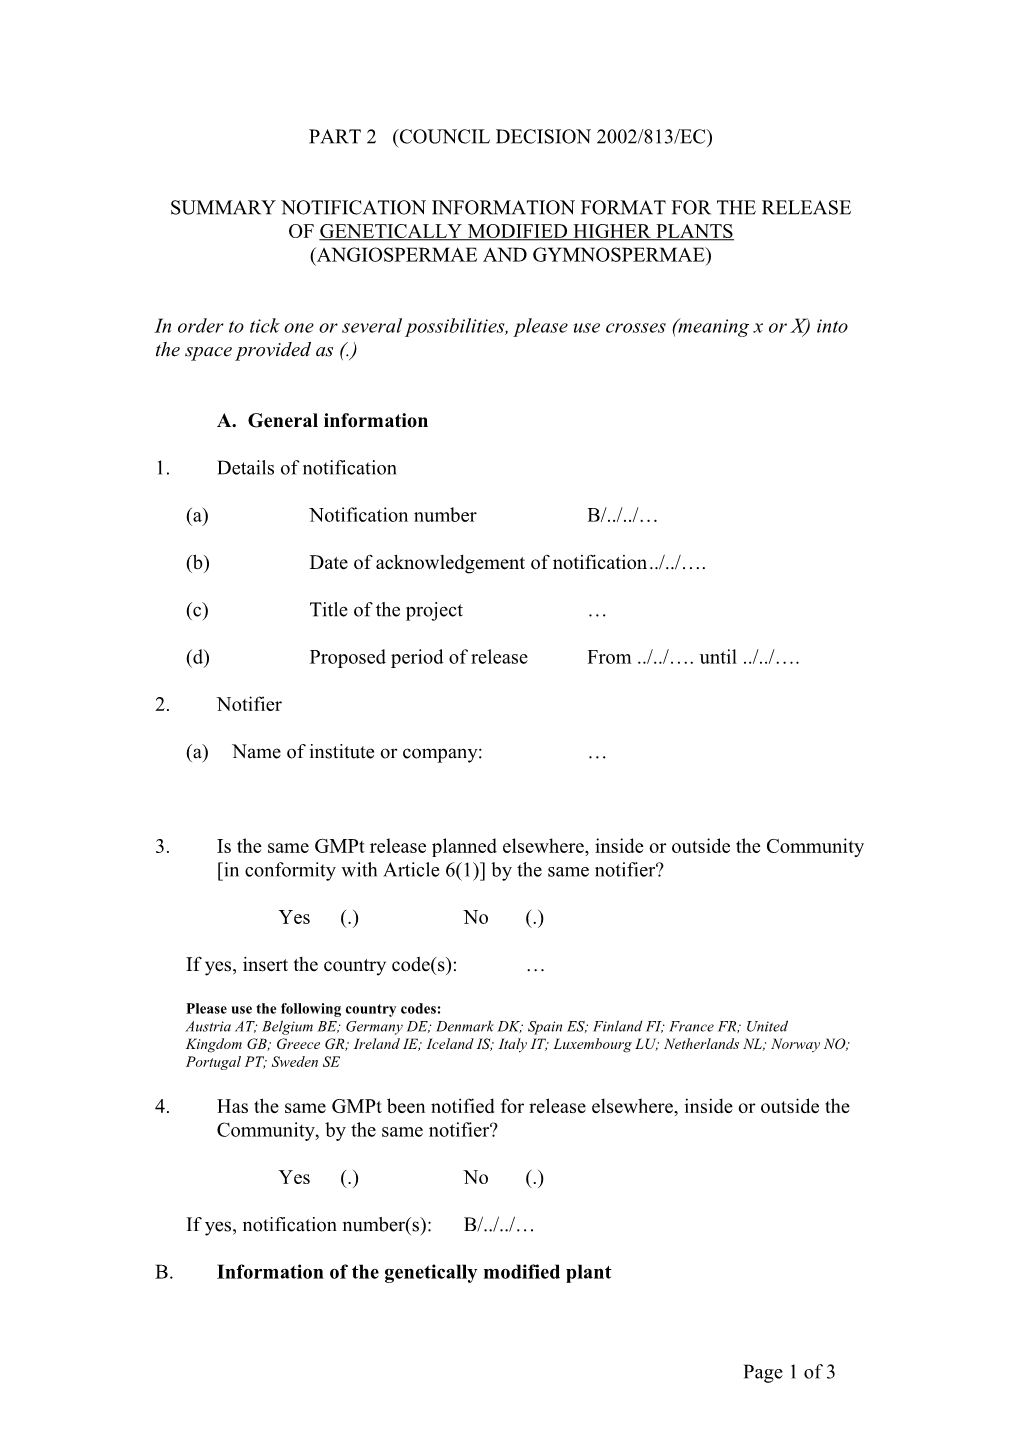 Summary Notification Information Format for the Release of Genetically Modified Higher Plants